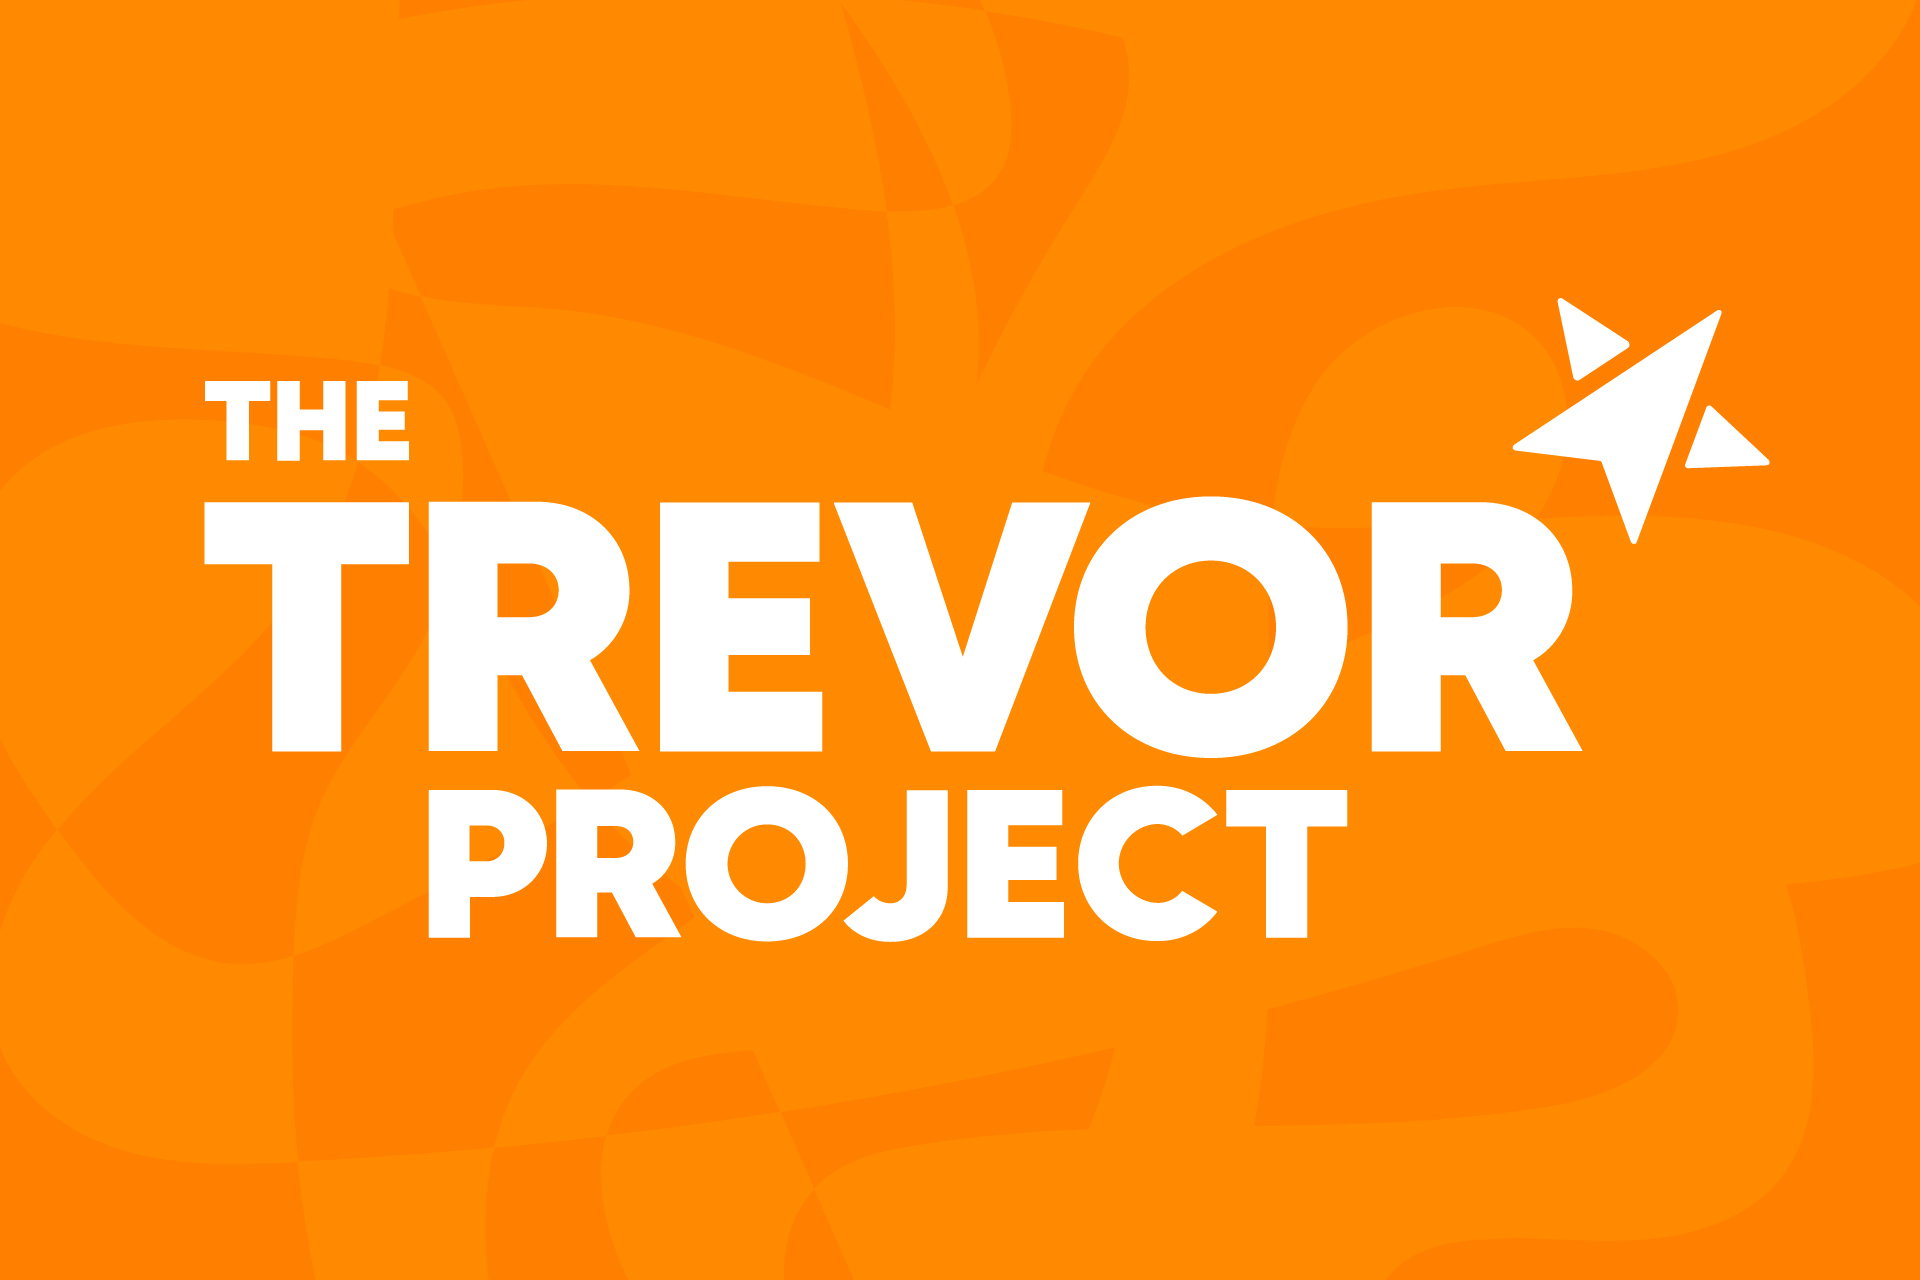 Journeys is proud to support The Trevor Project, the world’s largest crisis intervention and suicide prevention organization for LGBTQ youth.